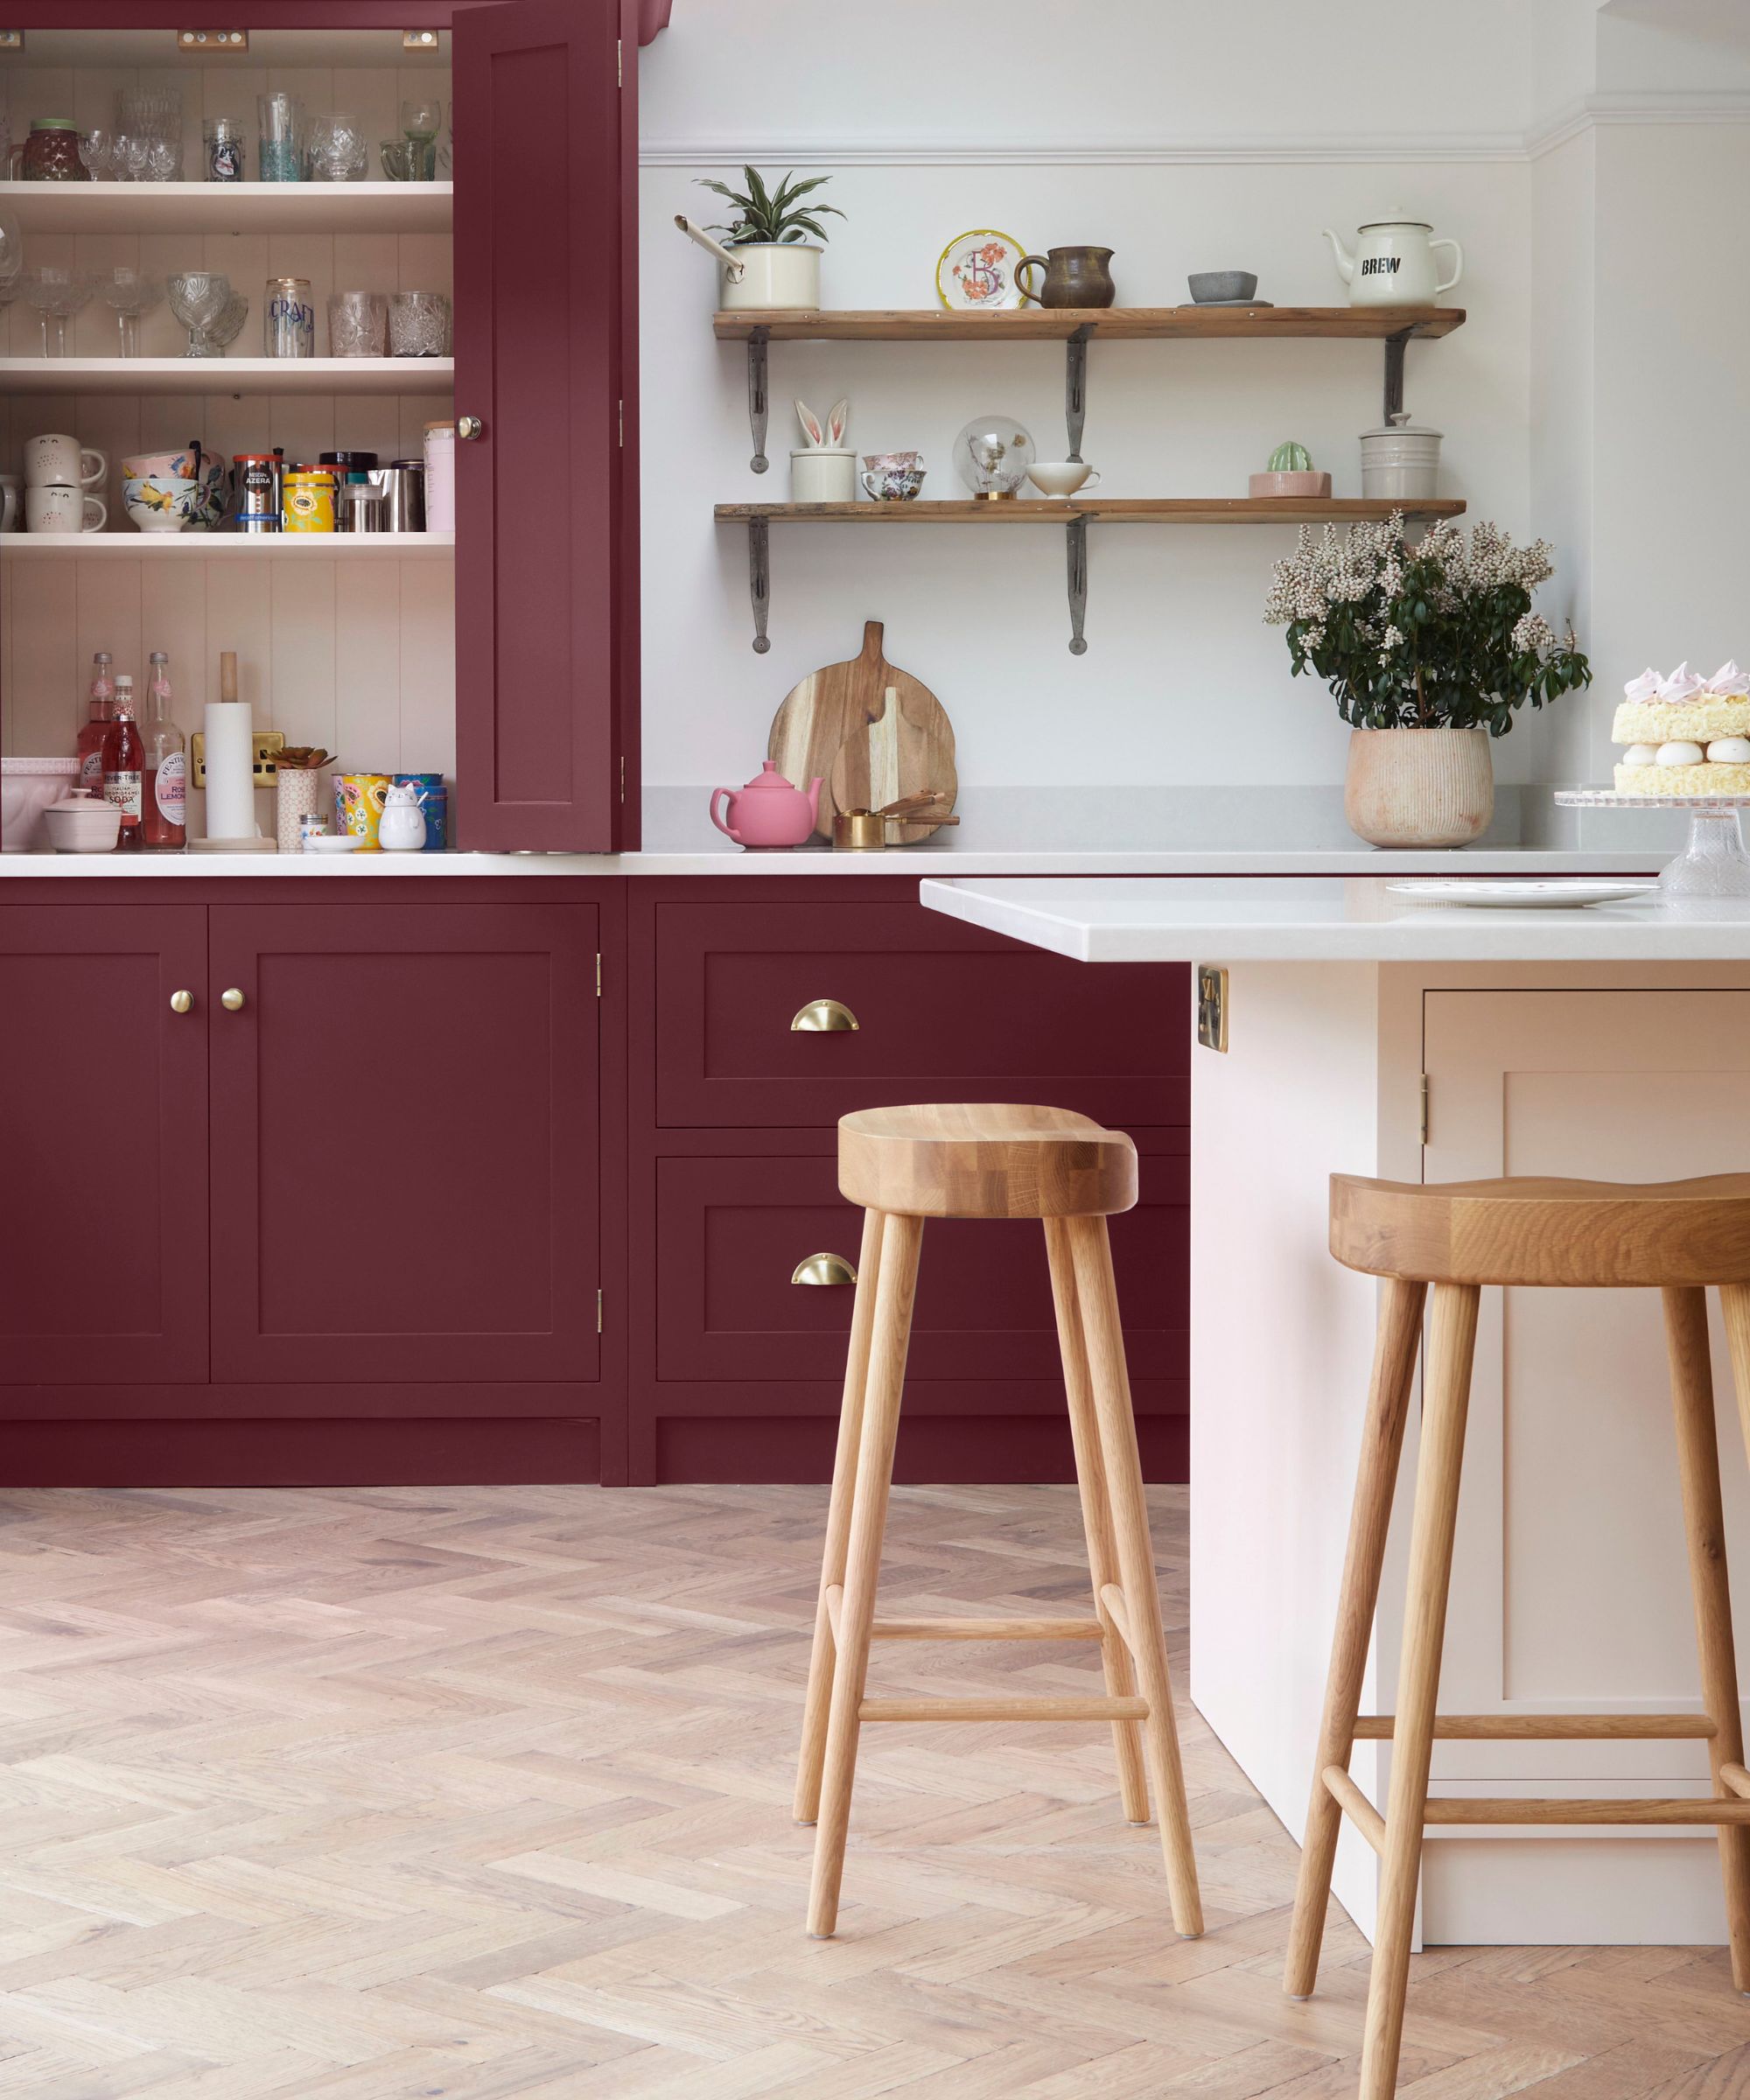 A kitchen with burgundy cabinets with open shelves with glasses and colorful mugs, wooden open shelves, and a light pink kitchen island in front with two curved wooden stools